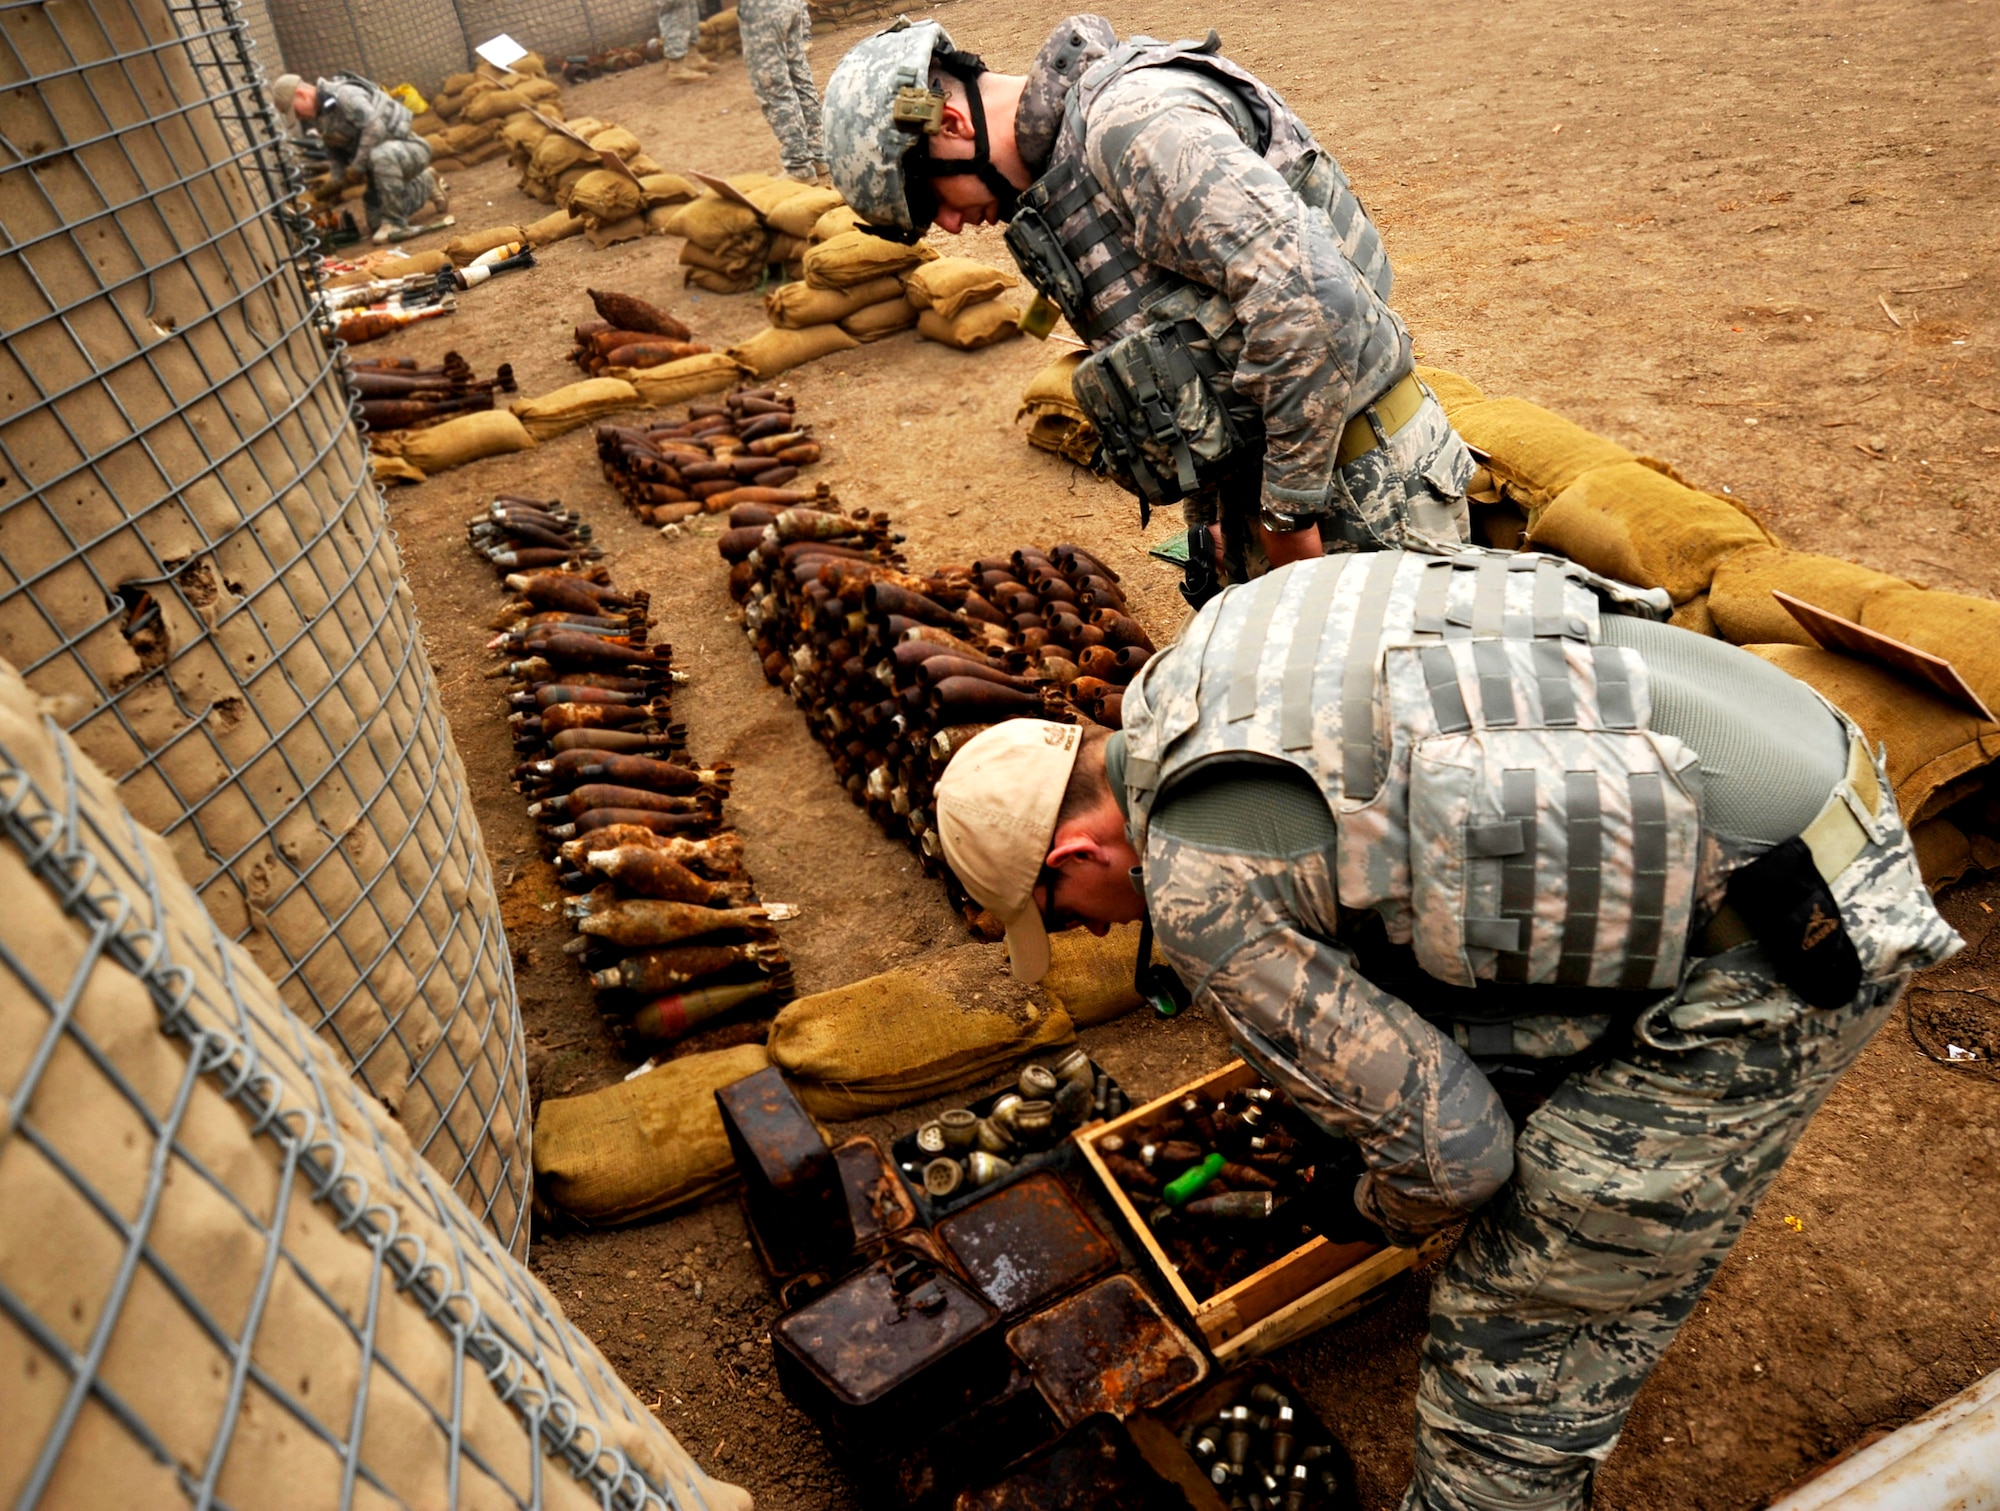 Staff Sgts. Cody Flood and Michael Jamison collect data on explosives in preparation for a controlled denotation Nov. 23, 2009, at Mahmudiyah, Iraq. Sergeants Flood and Jamison are 447th Expeditionary Civil Engineer Squadron explosive ordnance disposal technicians. (U.S. Air Force photo/Staff Sgt. Angelita Lawrence)
